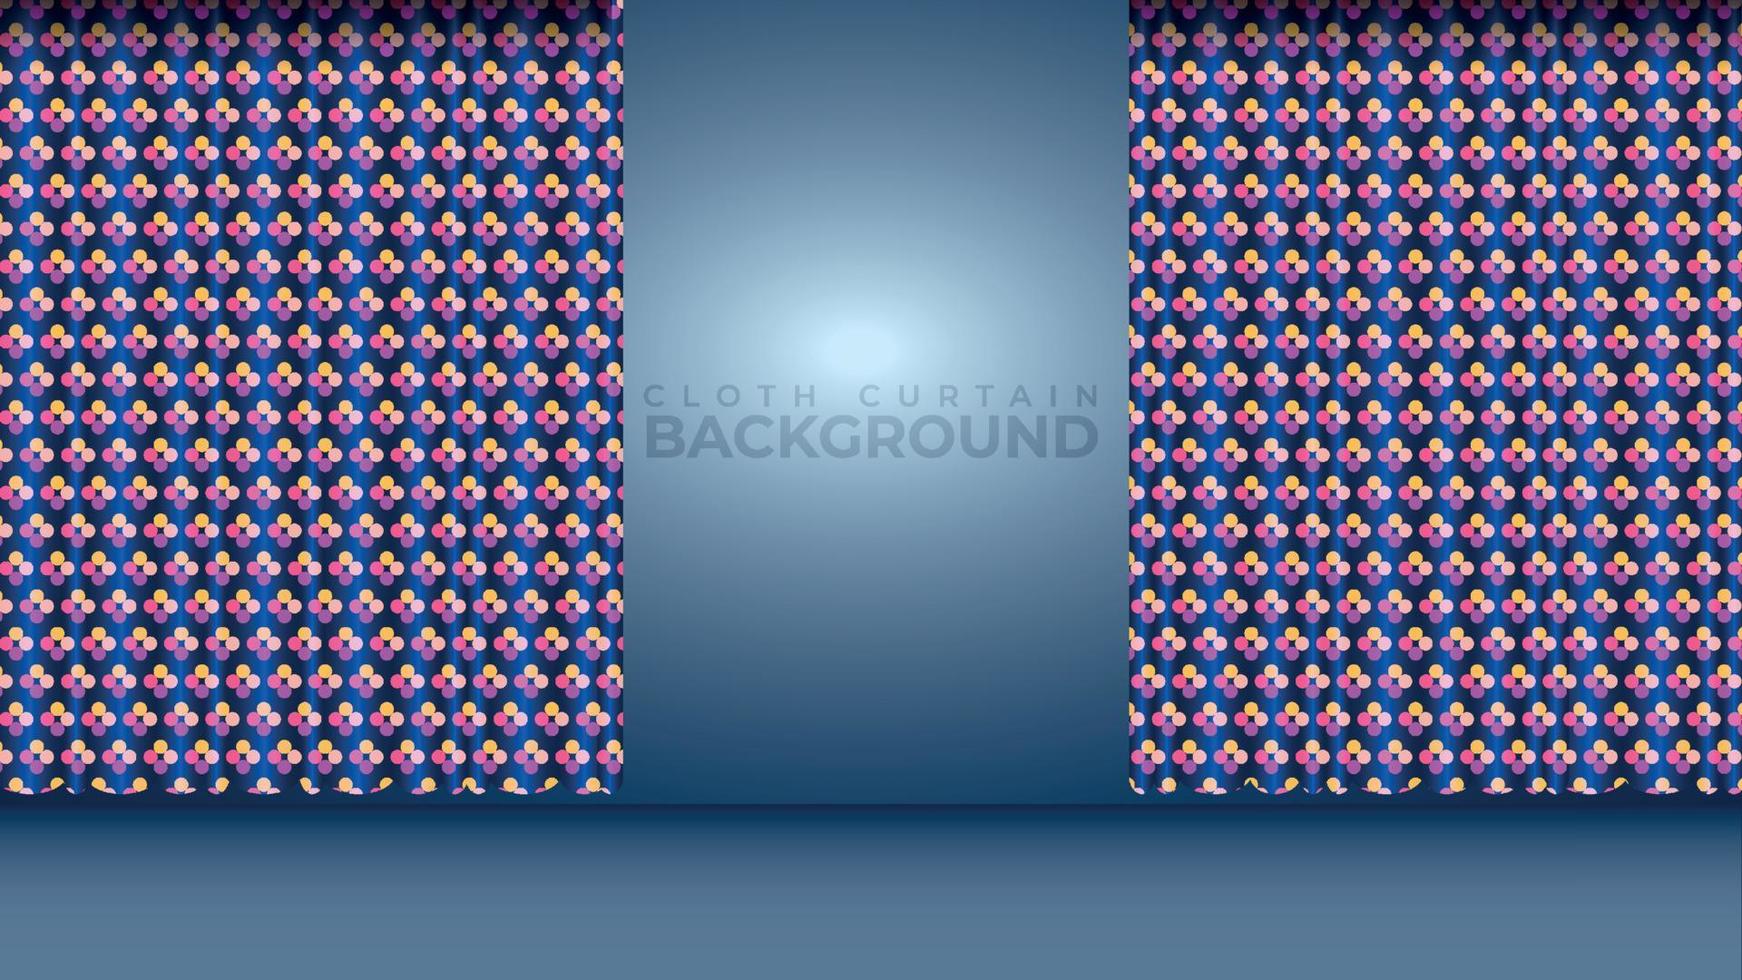 plain color patterned fabric curtain background vector